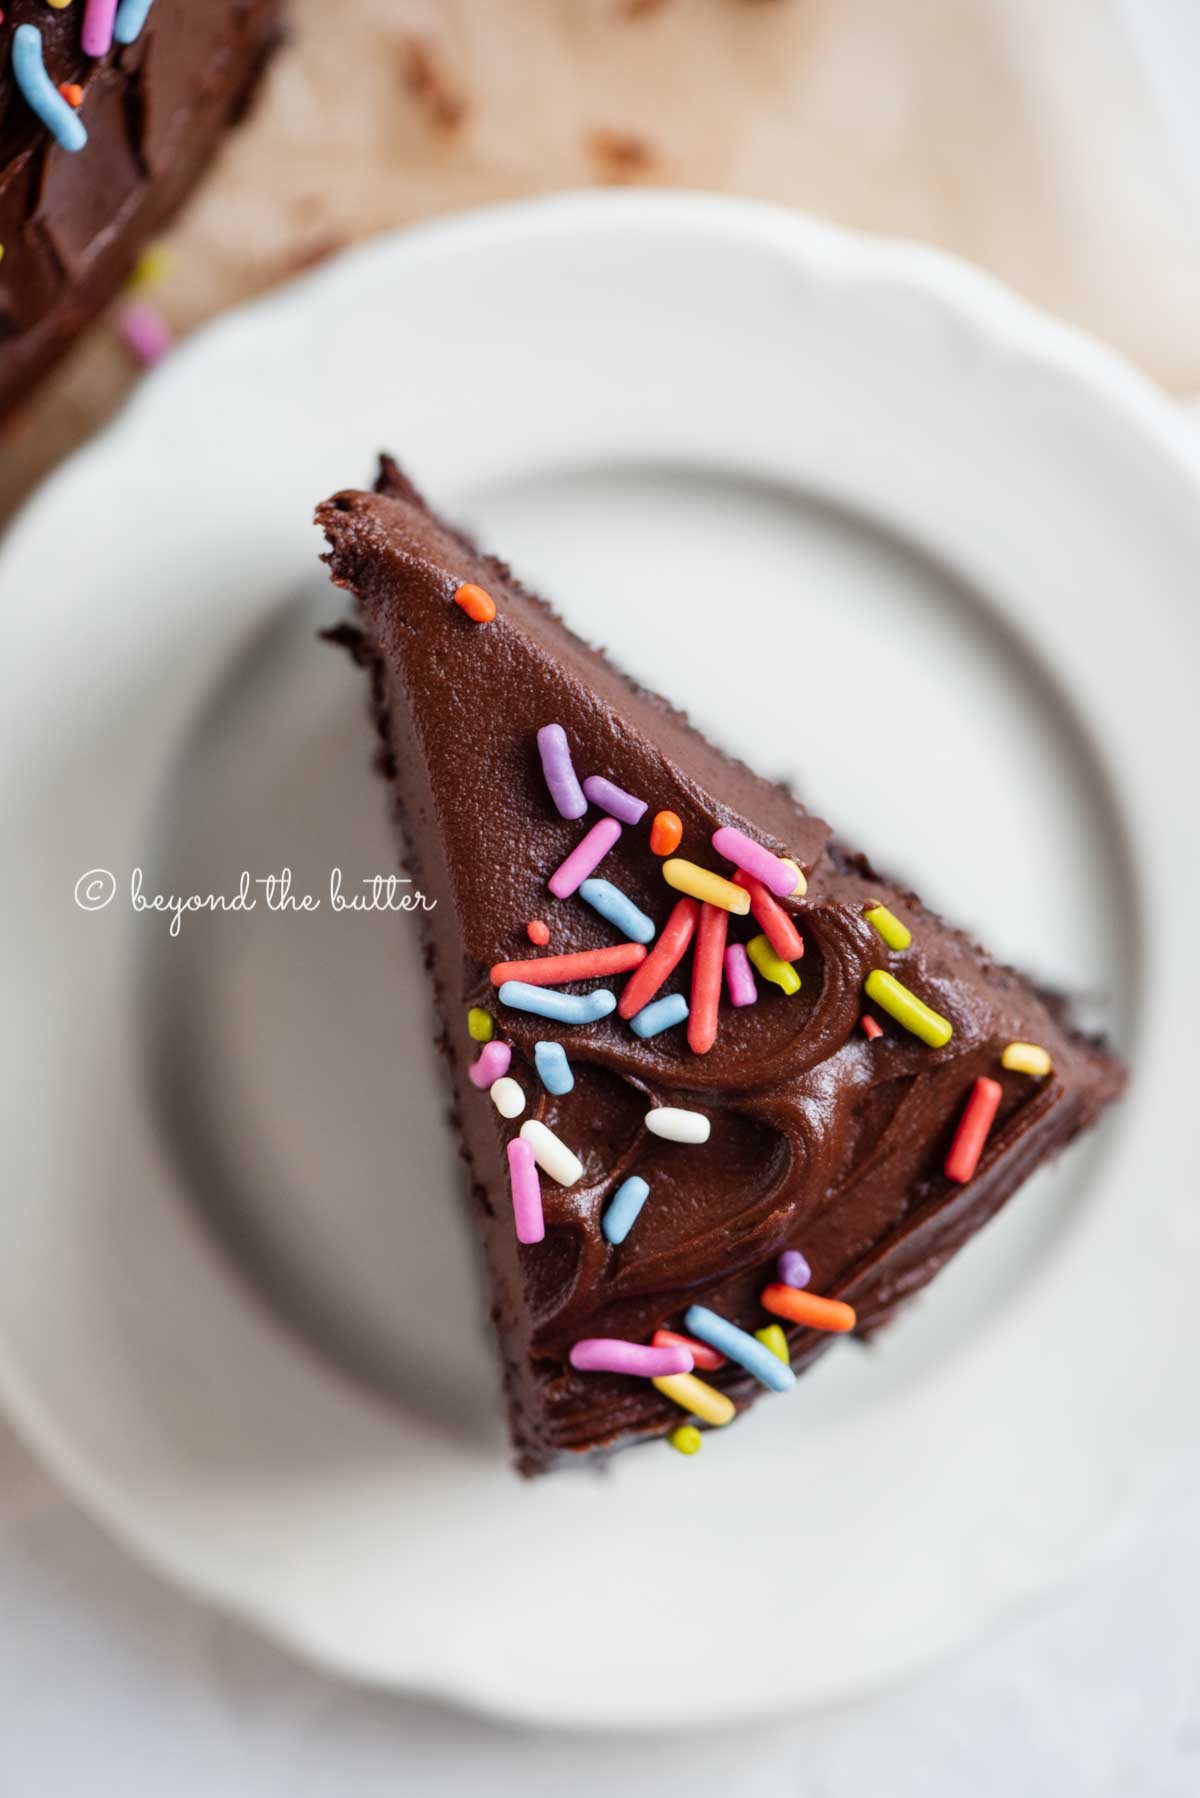 Overhead closeup image of single slice of 6 inch chocolate cake on white dessert plate | All Images © Beyond the Butter®